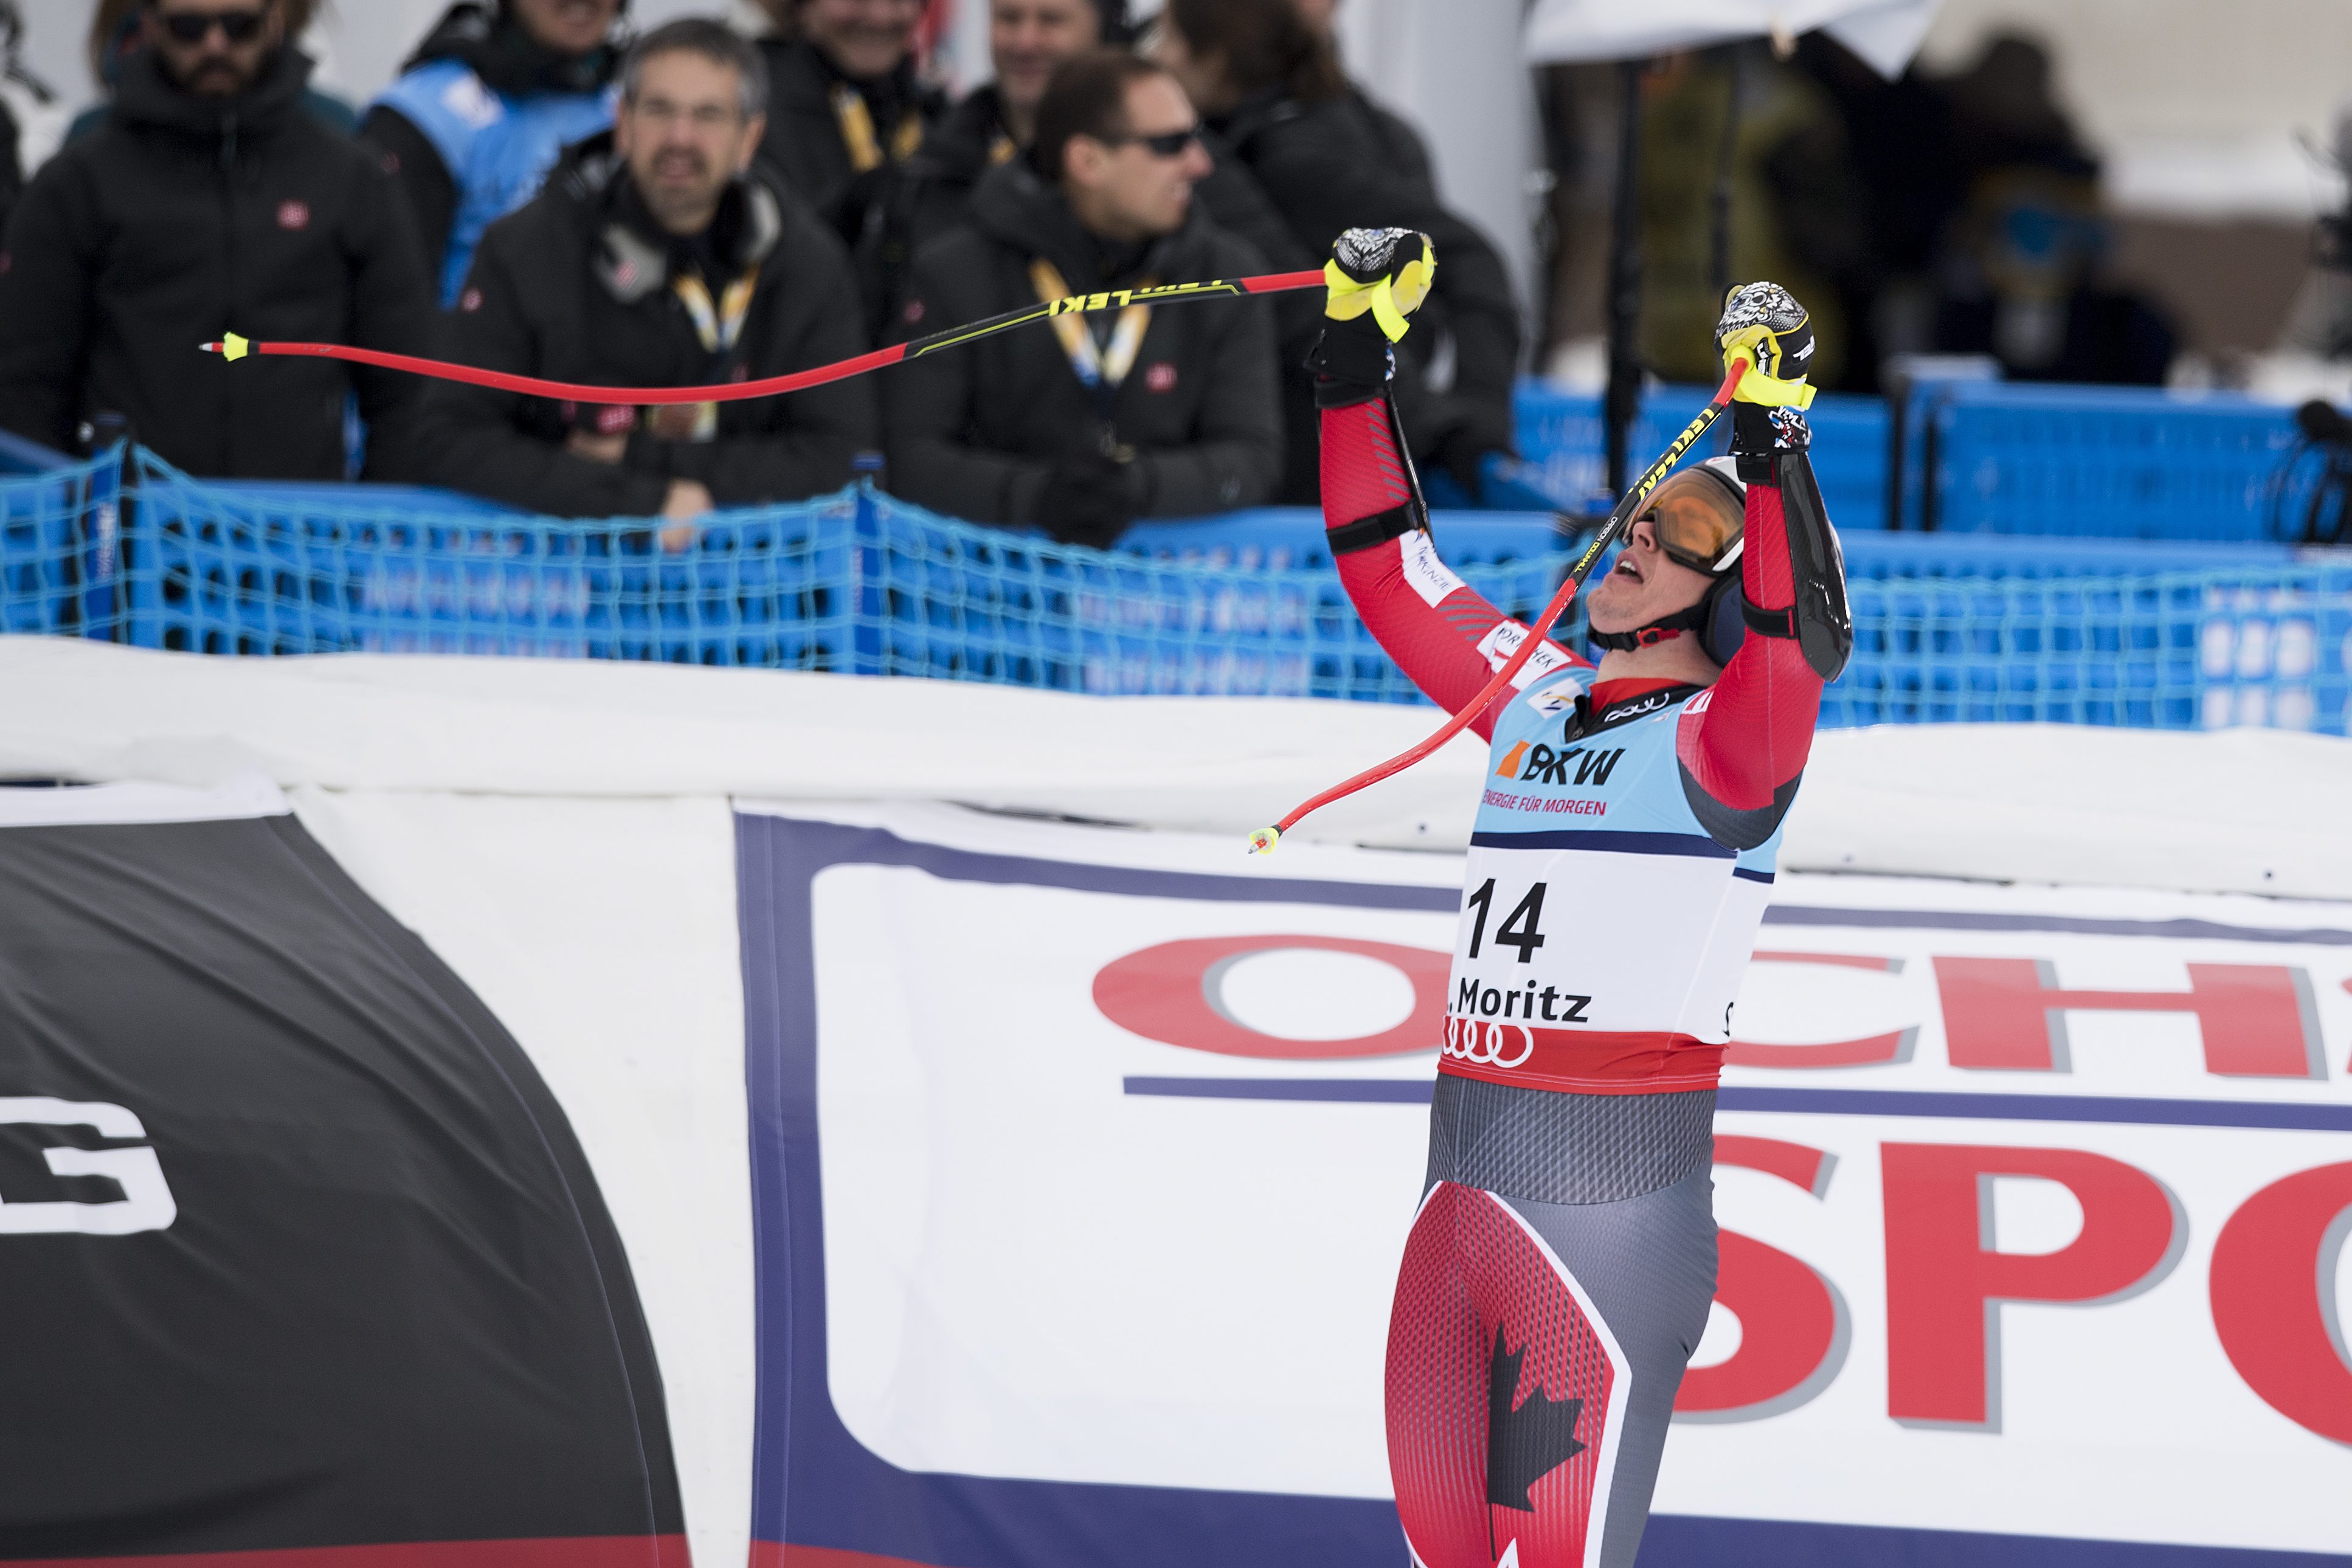 Erik Guay of Canada reacts in the finish area during the men's Super-G race at the 2017 Alpine Skiing World Championships in St. Moritz, Switzerland, Wednesday, Feb. 8, 2017. (Alexandra Wey/Keystone via AP)